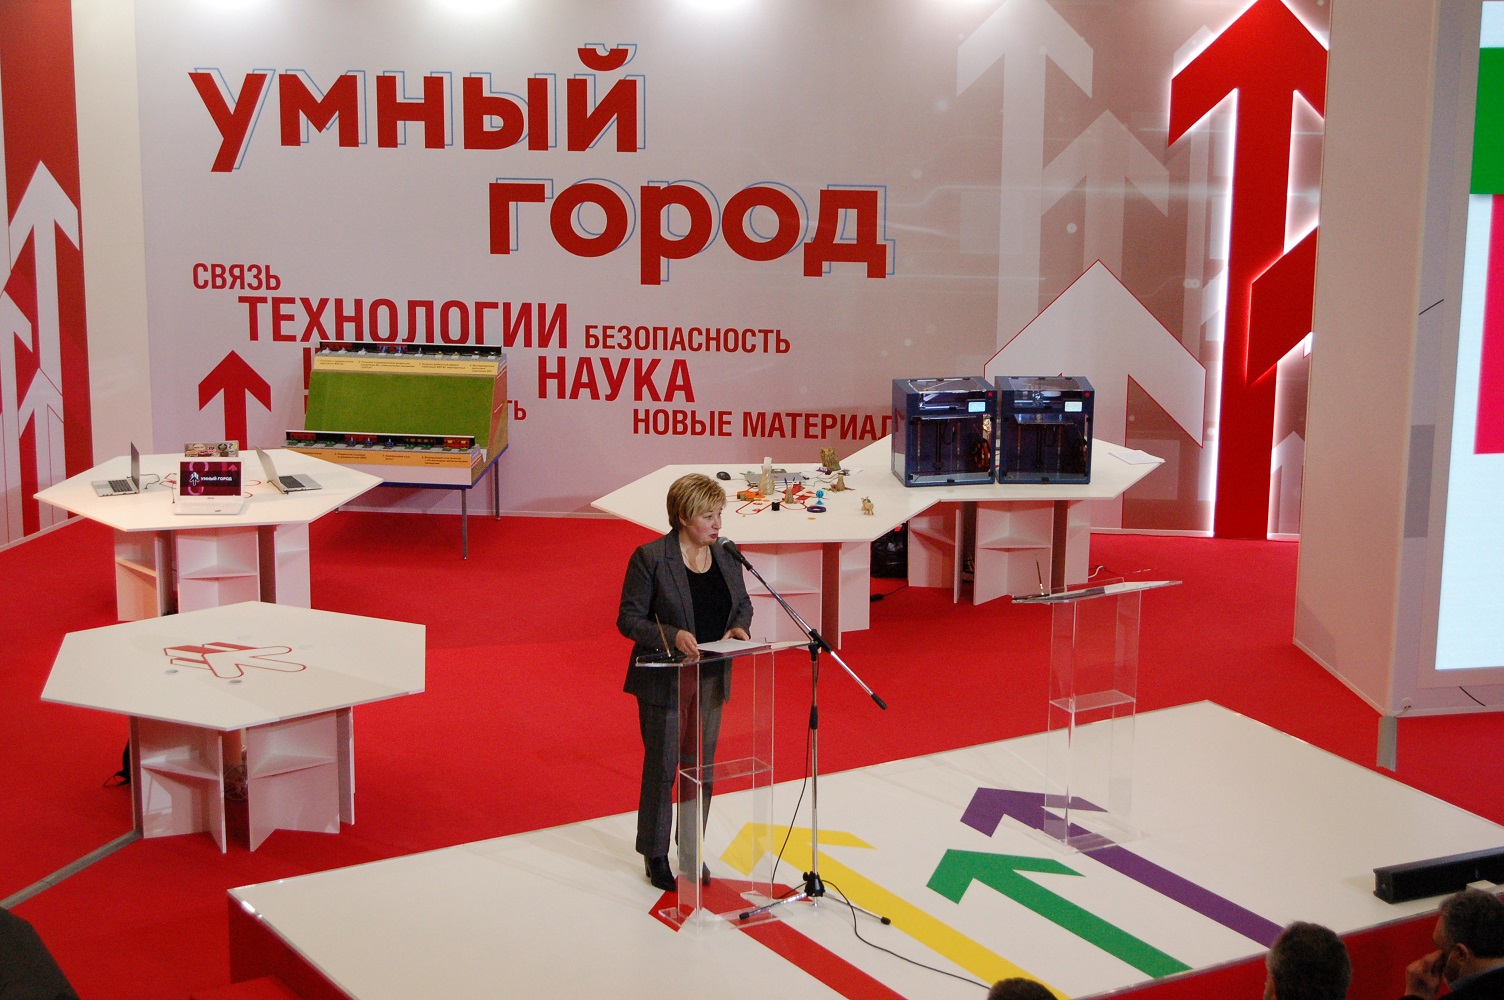 The career guidance project "Profstart" has been officially launched in St. Petersburg